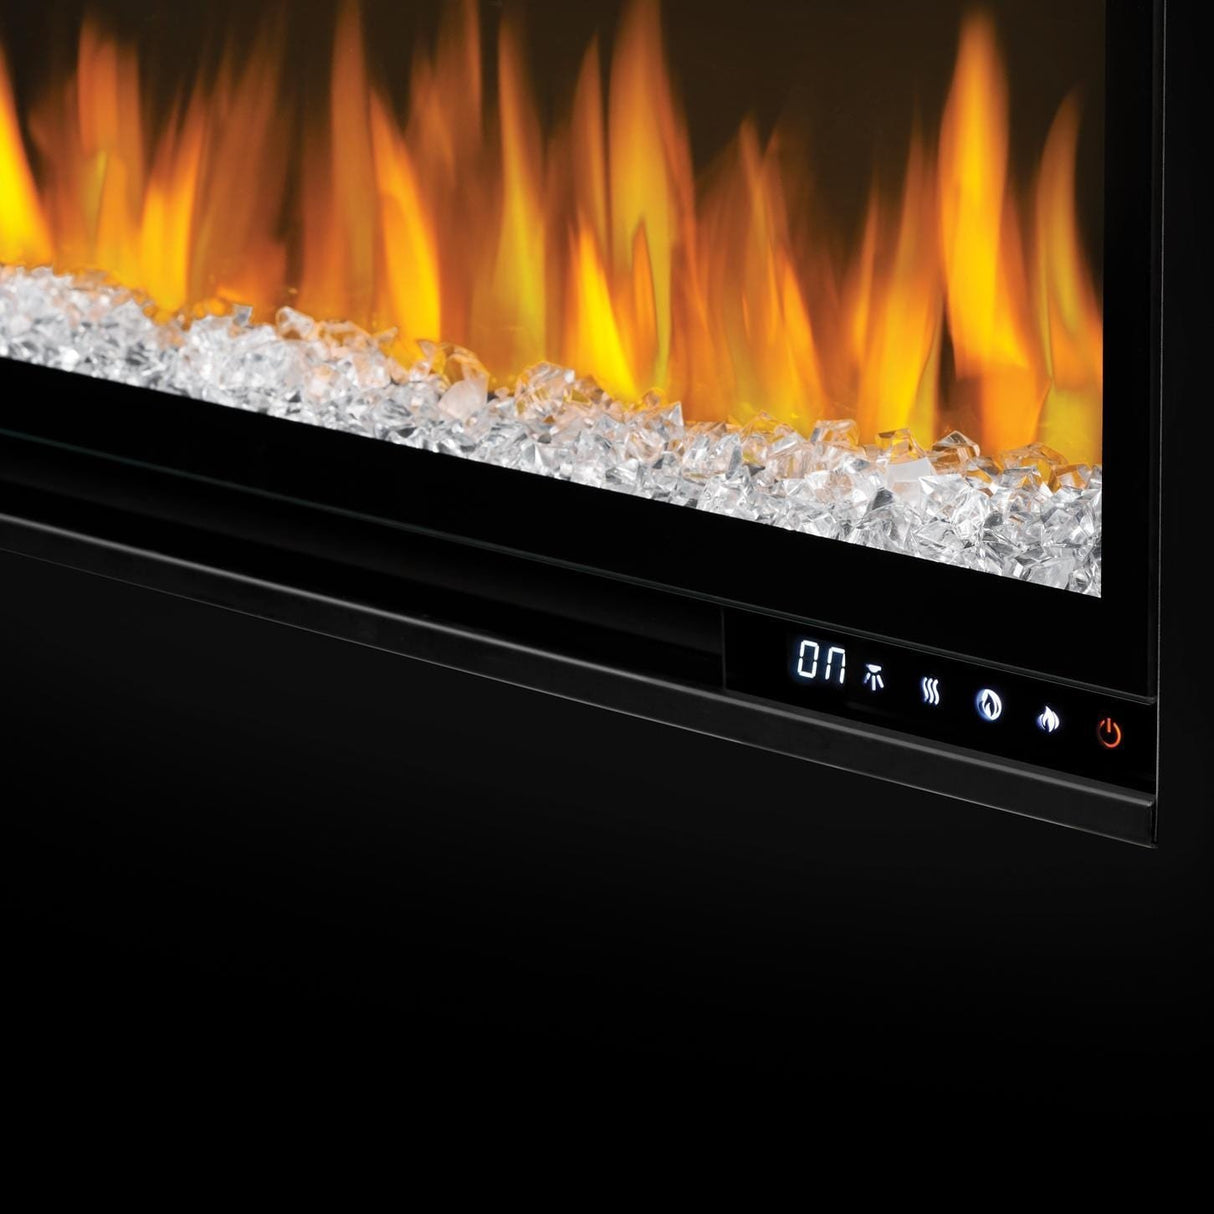 Napoleon Alluravision Slimline 60-Inch Electric Fireplace - NEFL60CHS - Wall or Recessed